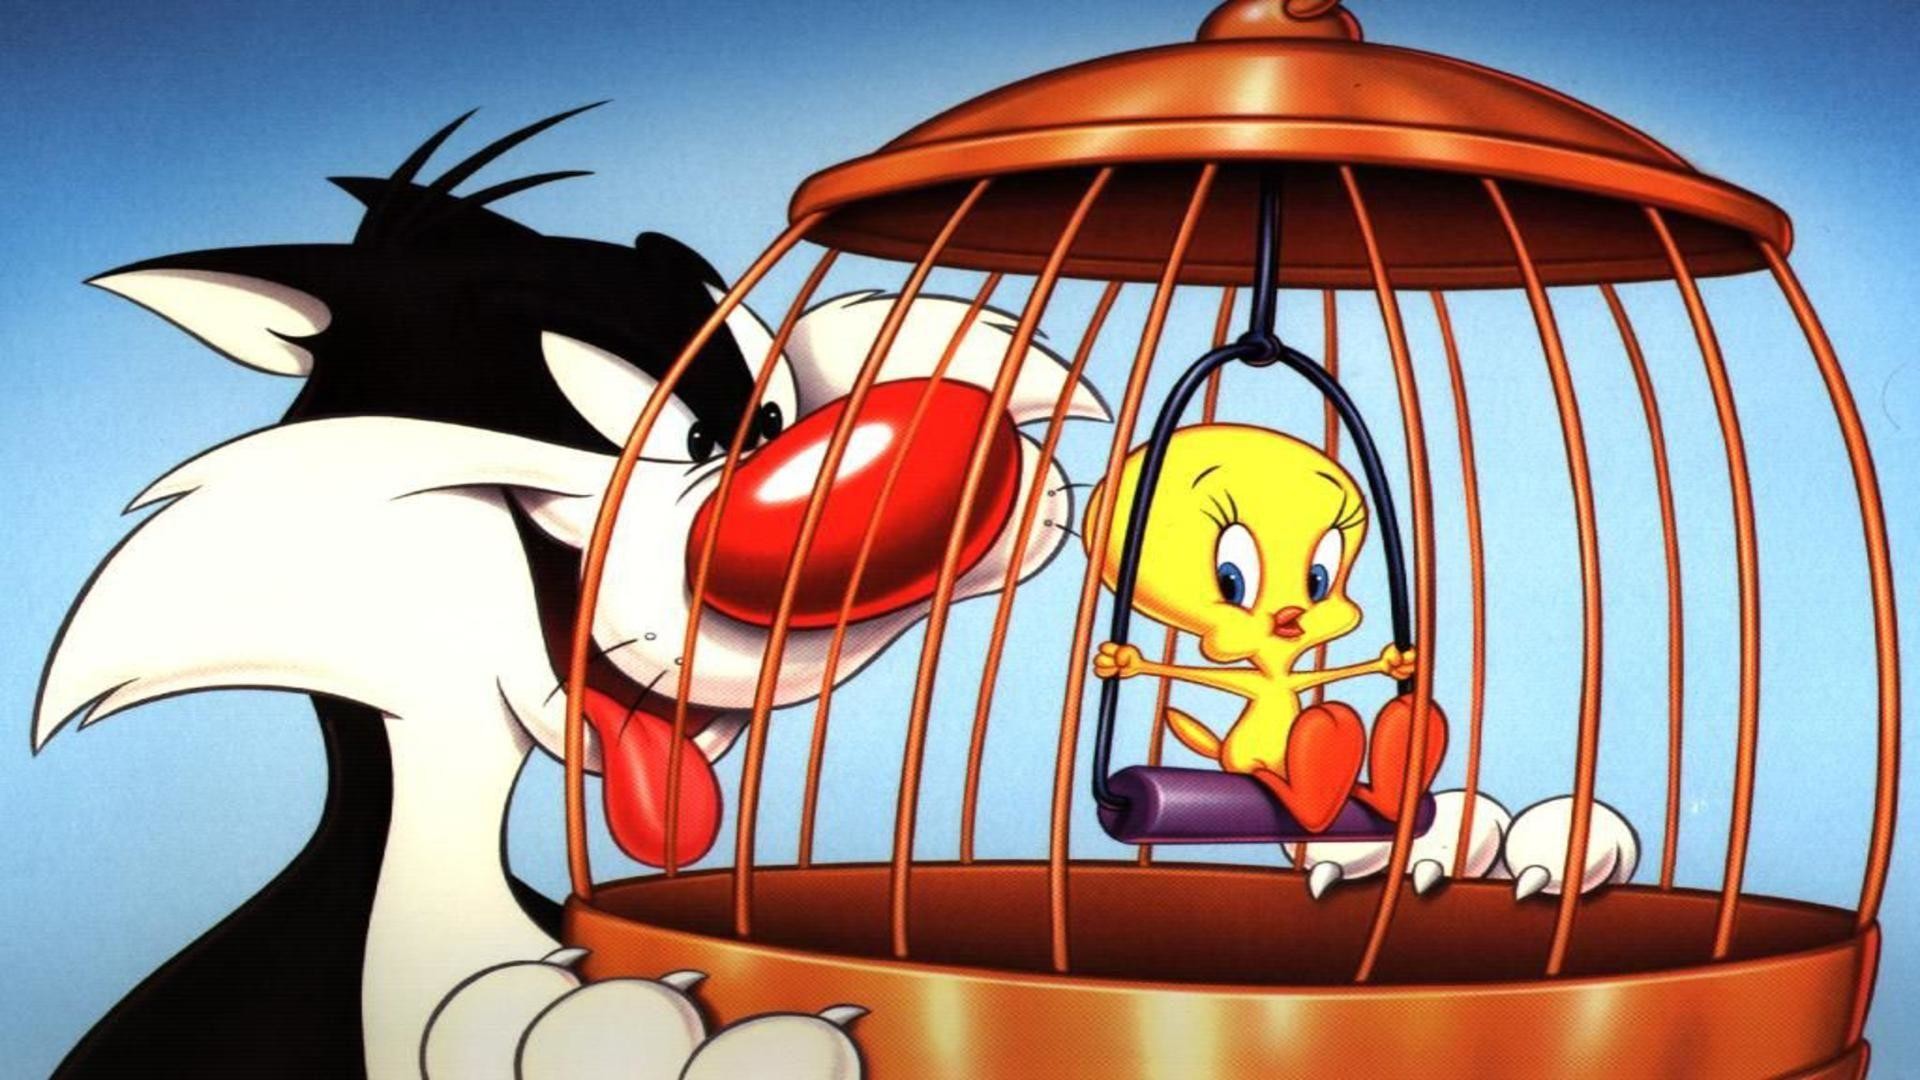 1920x1080 Sylvester tweety wallpaper cartoon frame cat and bird in cage free .